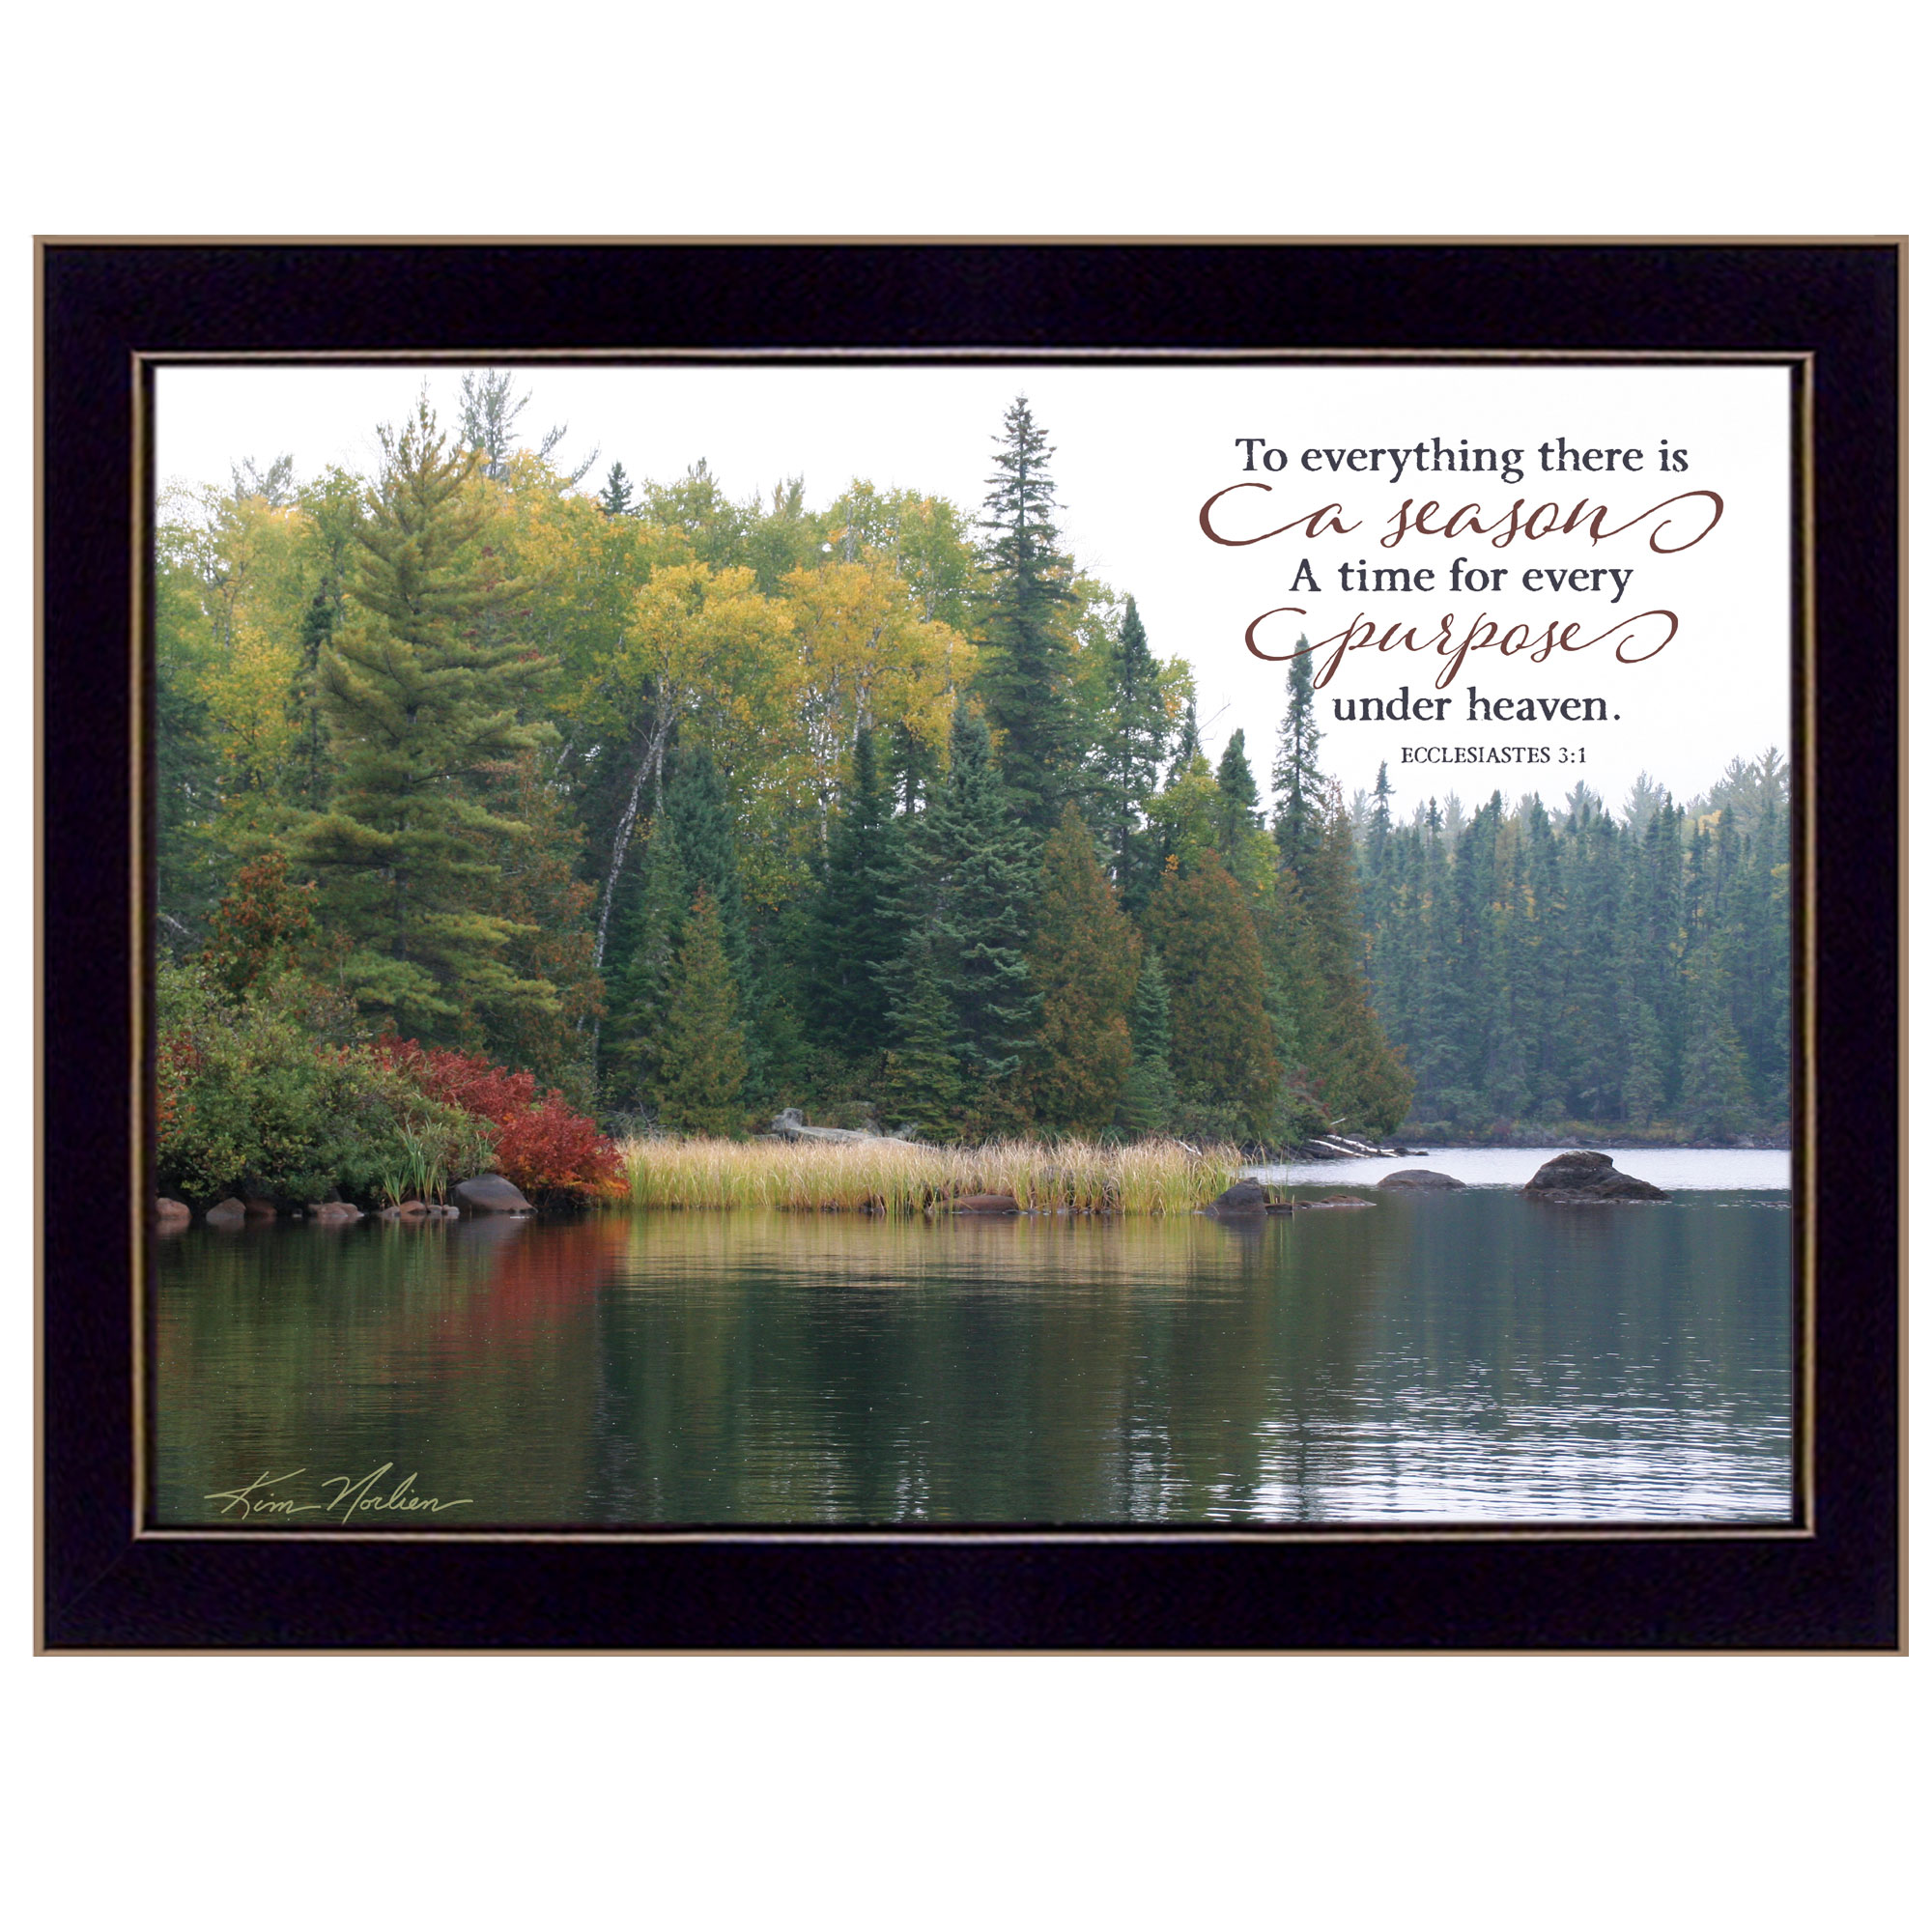 "To Everything There is a Season" by Kim Norlien, Ready to Hang Framed Print, Black Frame